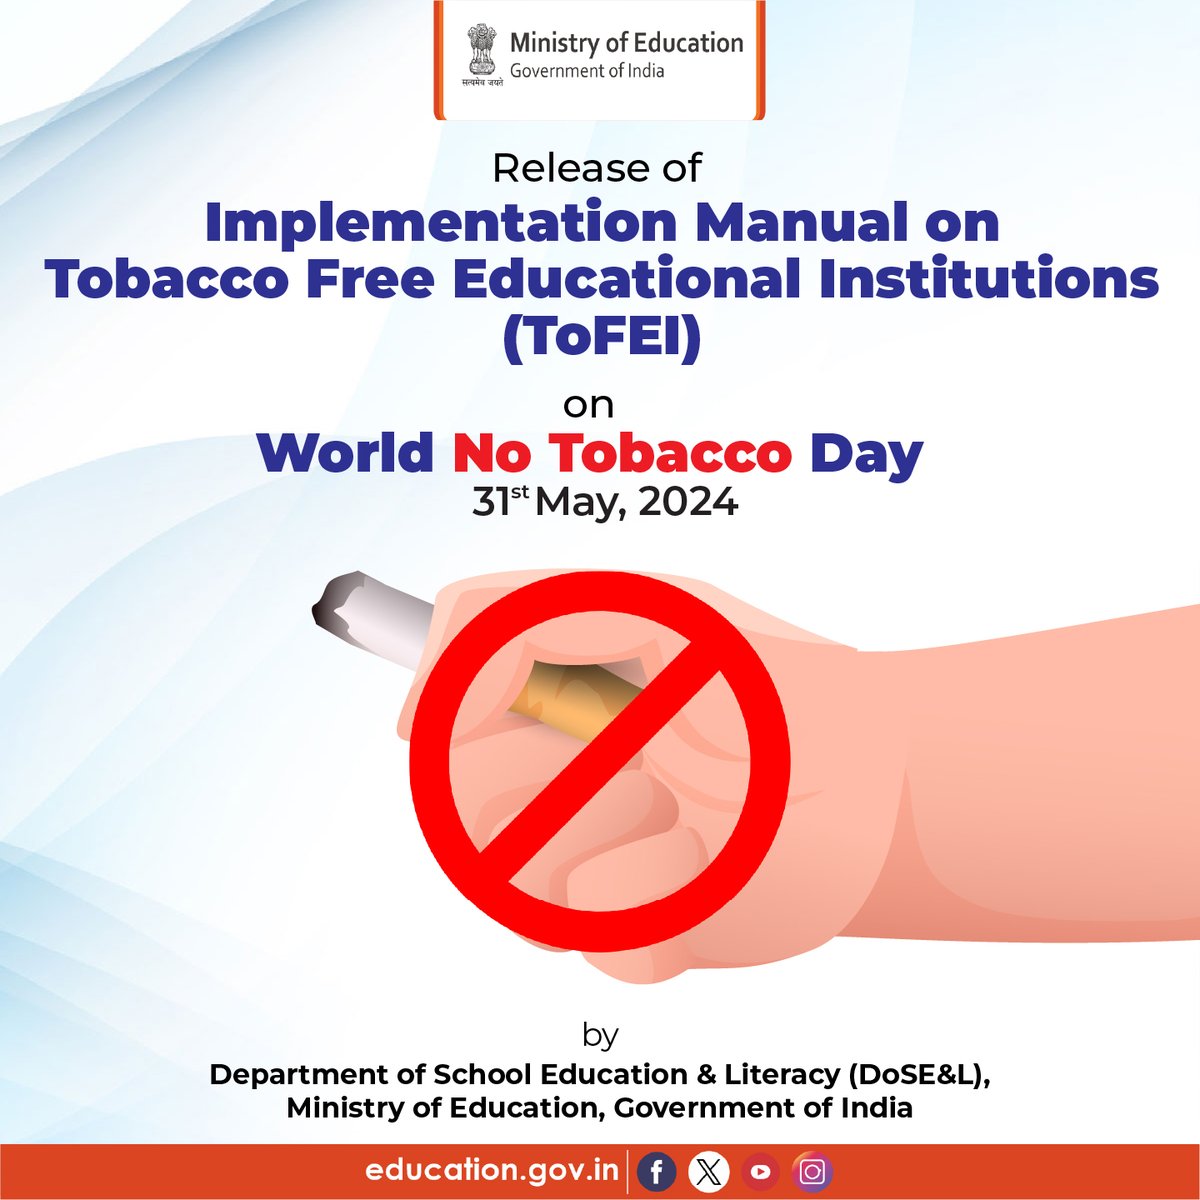 This ‘World No Tobacco Day’, the Department of School Education and Literacy, Ministry of Education reaffirms its dedication to shaping a tobacco-free future, aligning with this year’s theme, “Protecting children from tobacco industry interference”. Let's unite as educators and